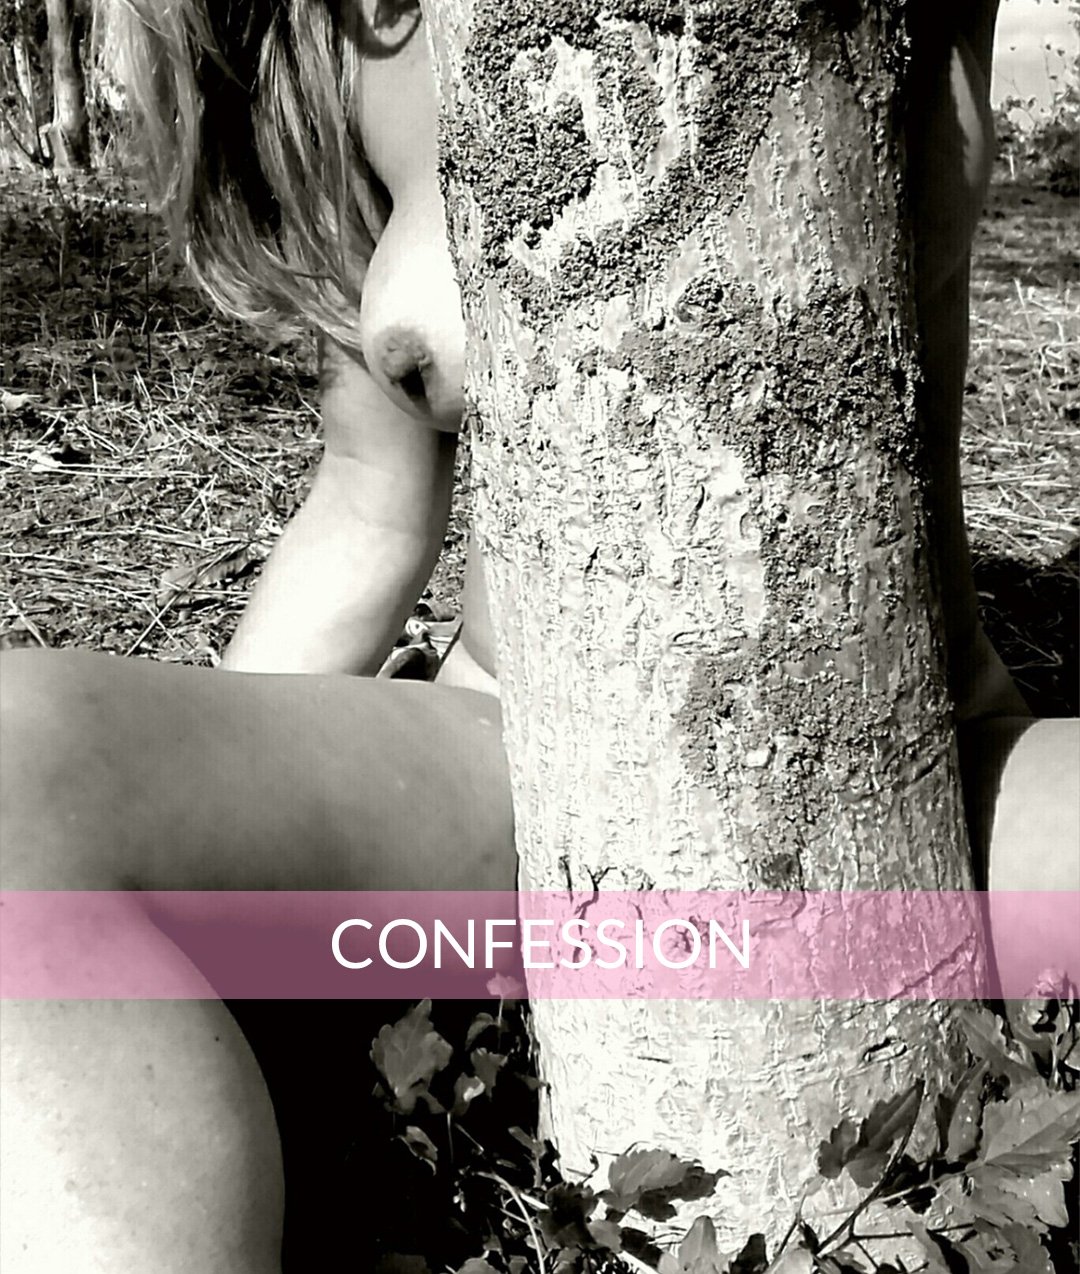 My readers real sex story confessions from couples and women picture